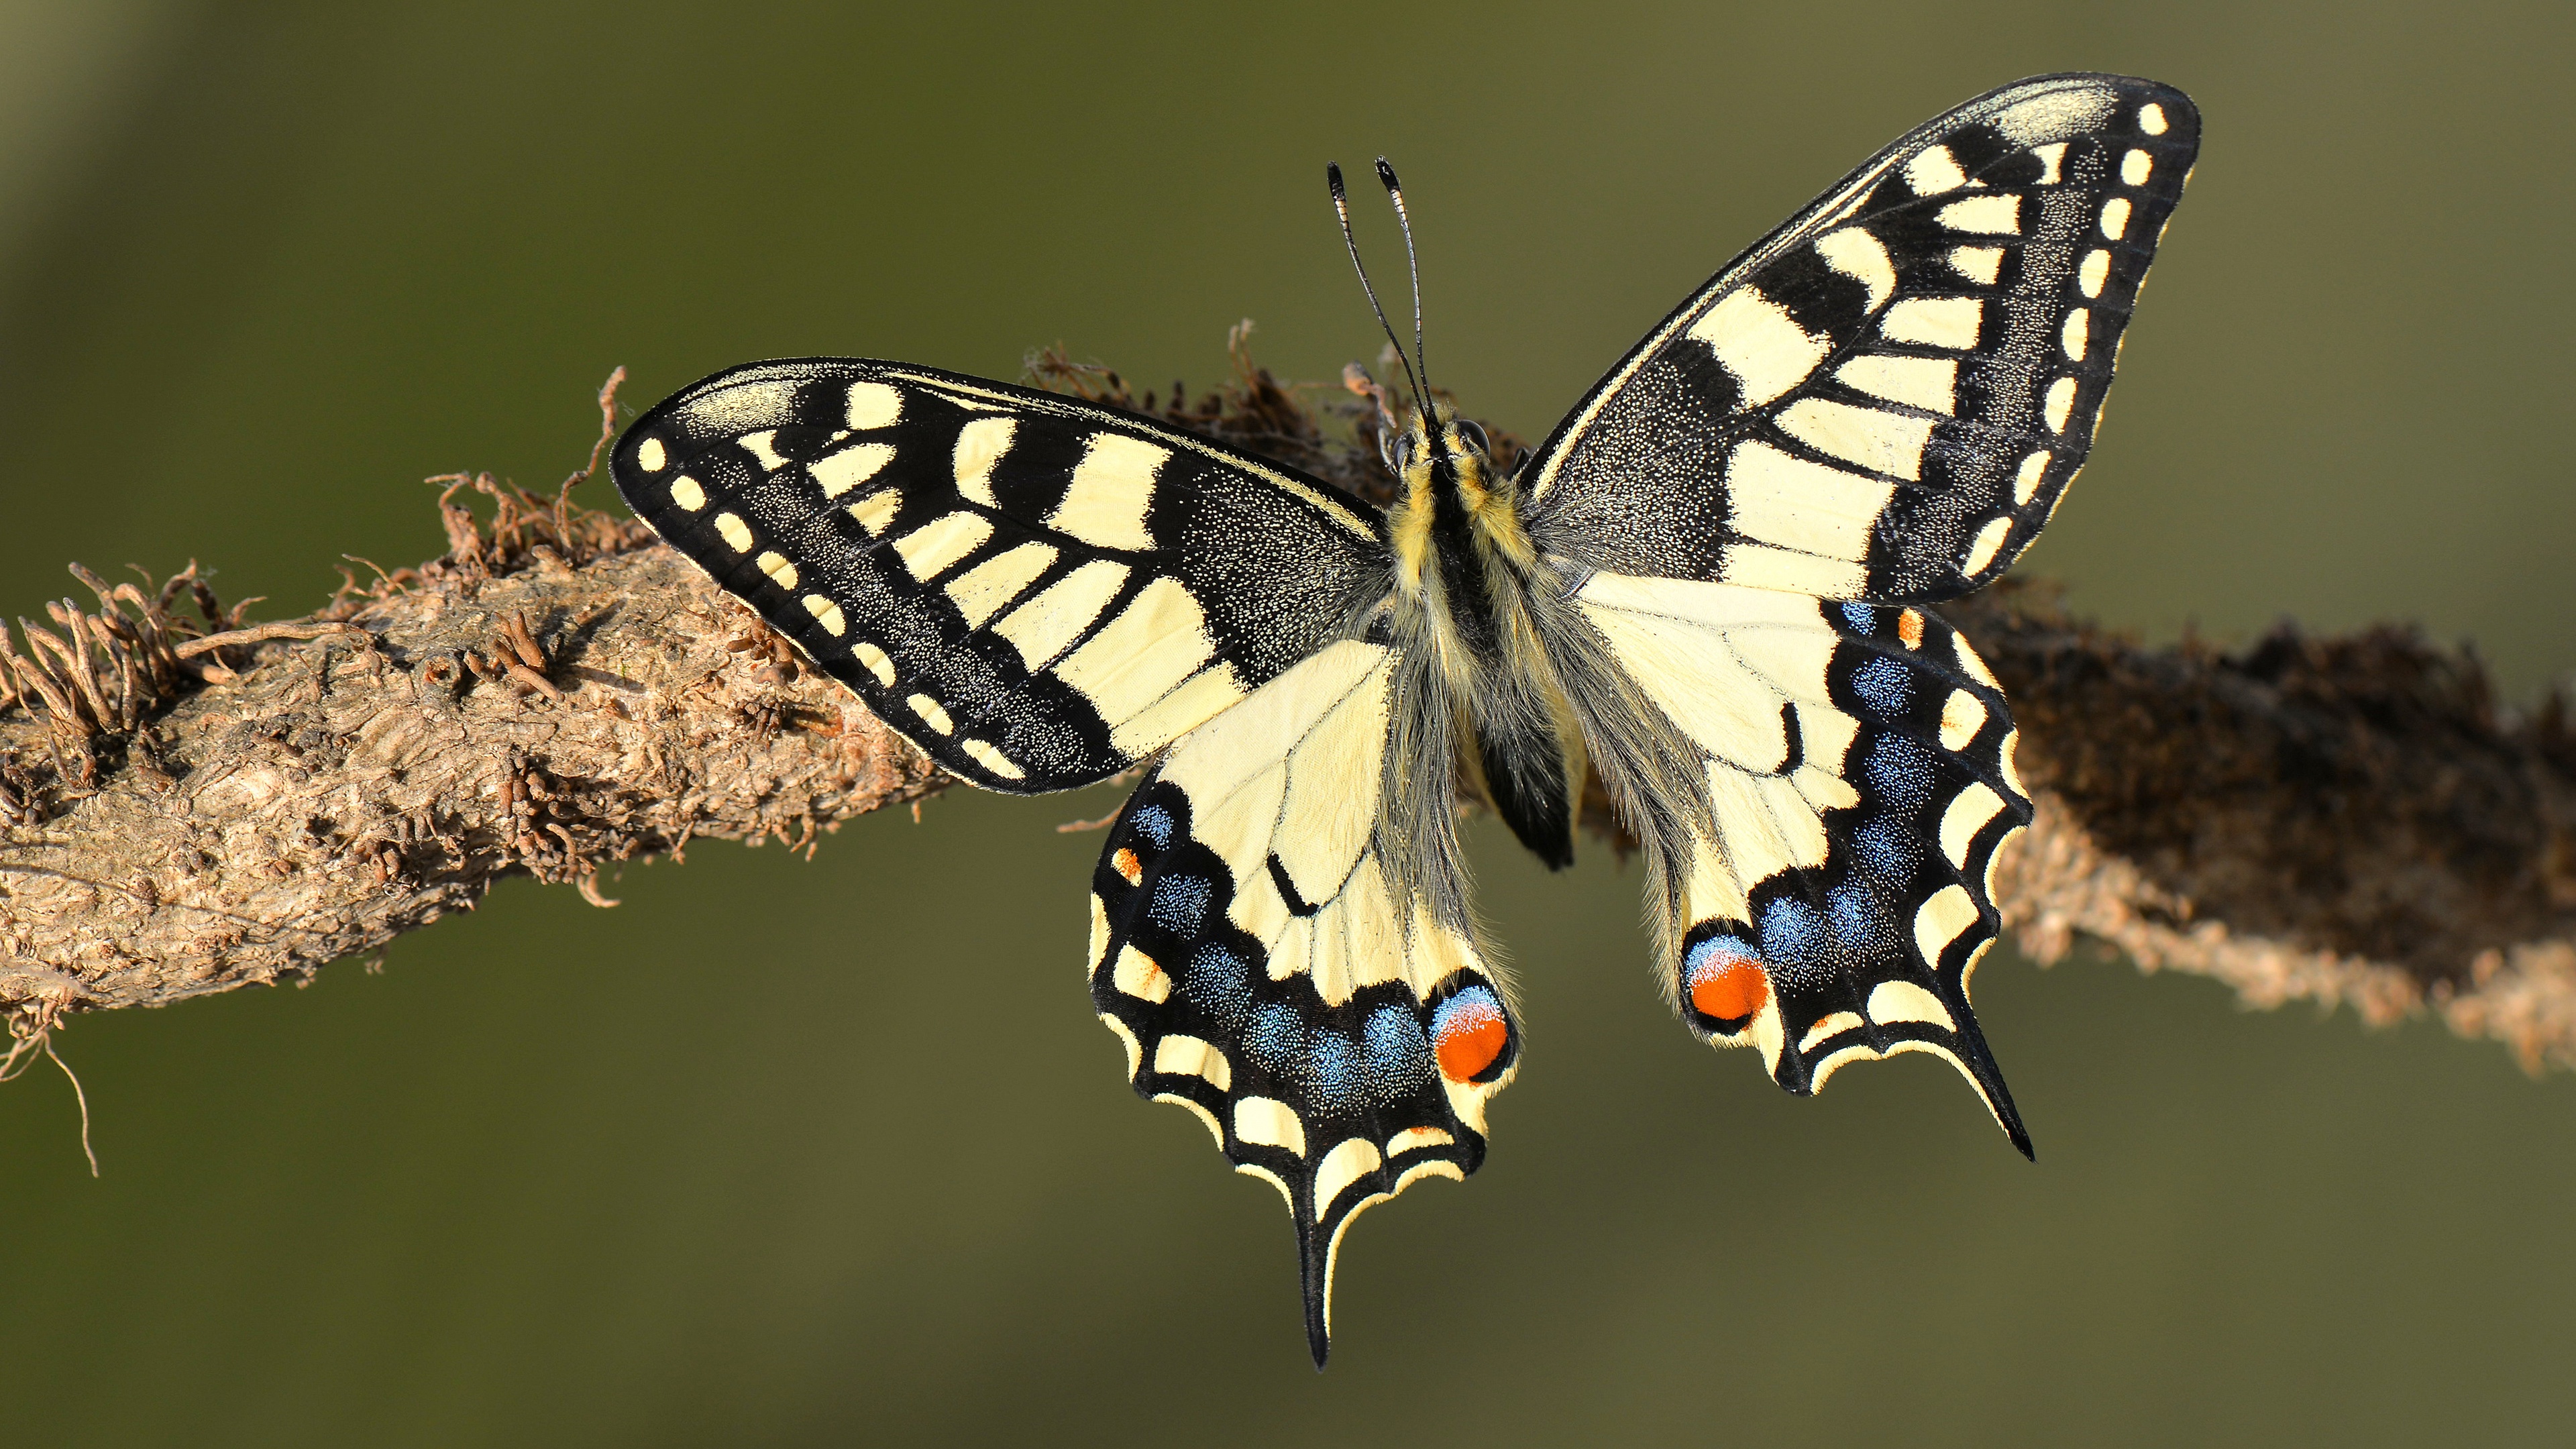 animal, swallowtail butterfly, branch, butterfly, macro, insects